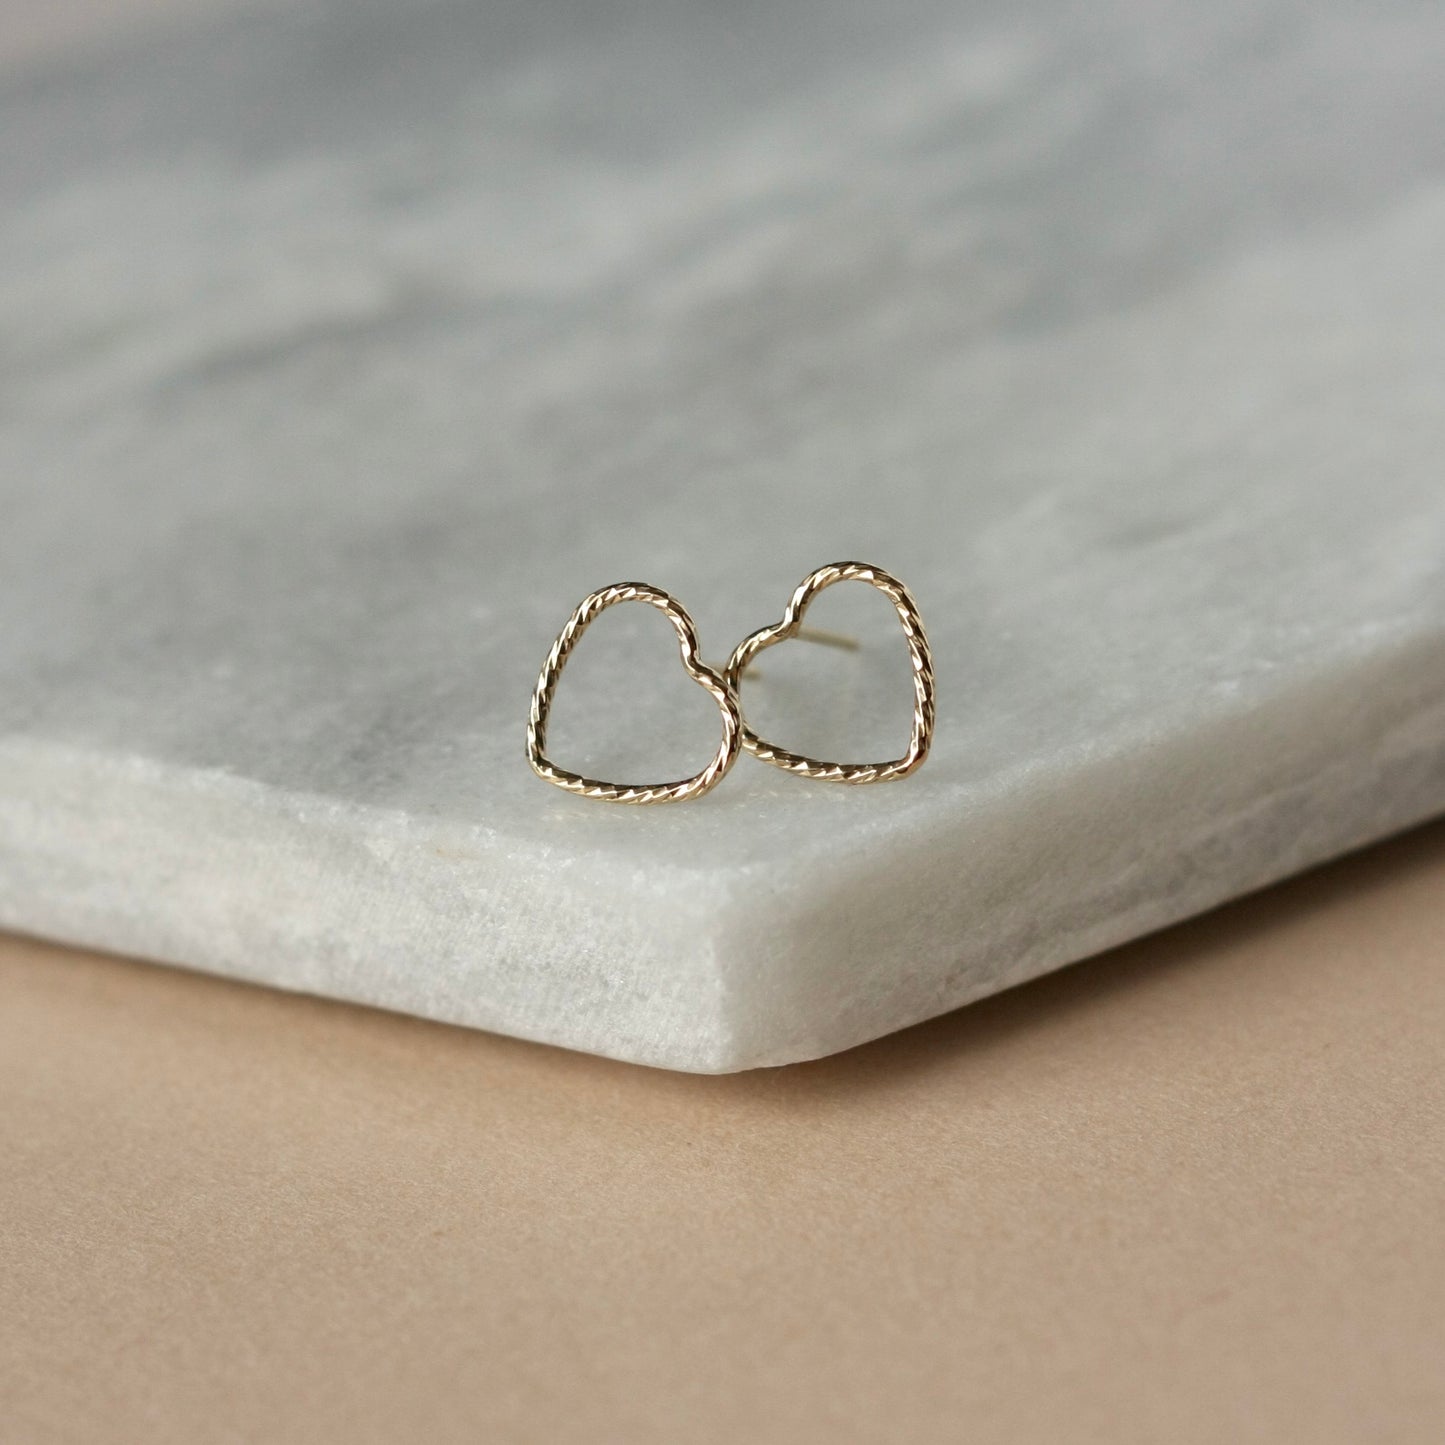 Sparkly Gold Heart Stud Earrings